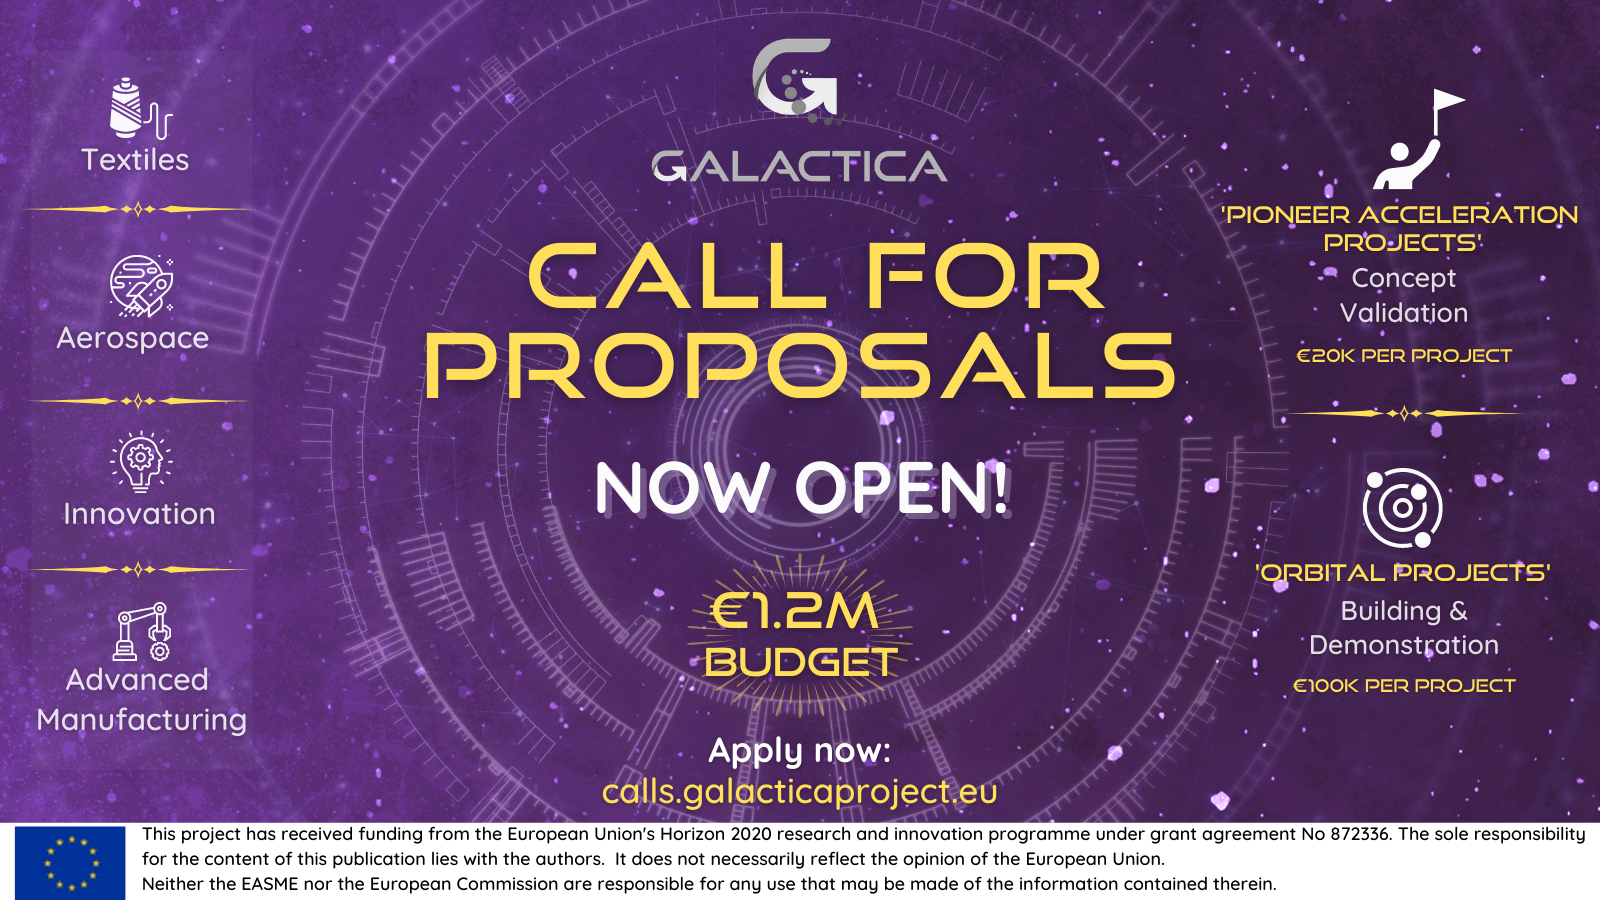 GALACTICA - Call for Proposals